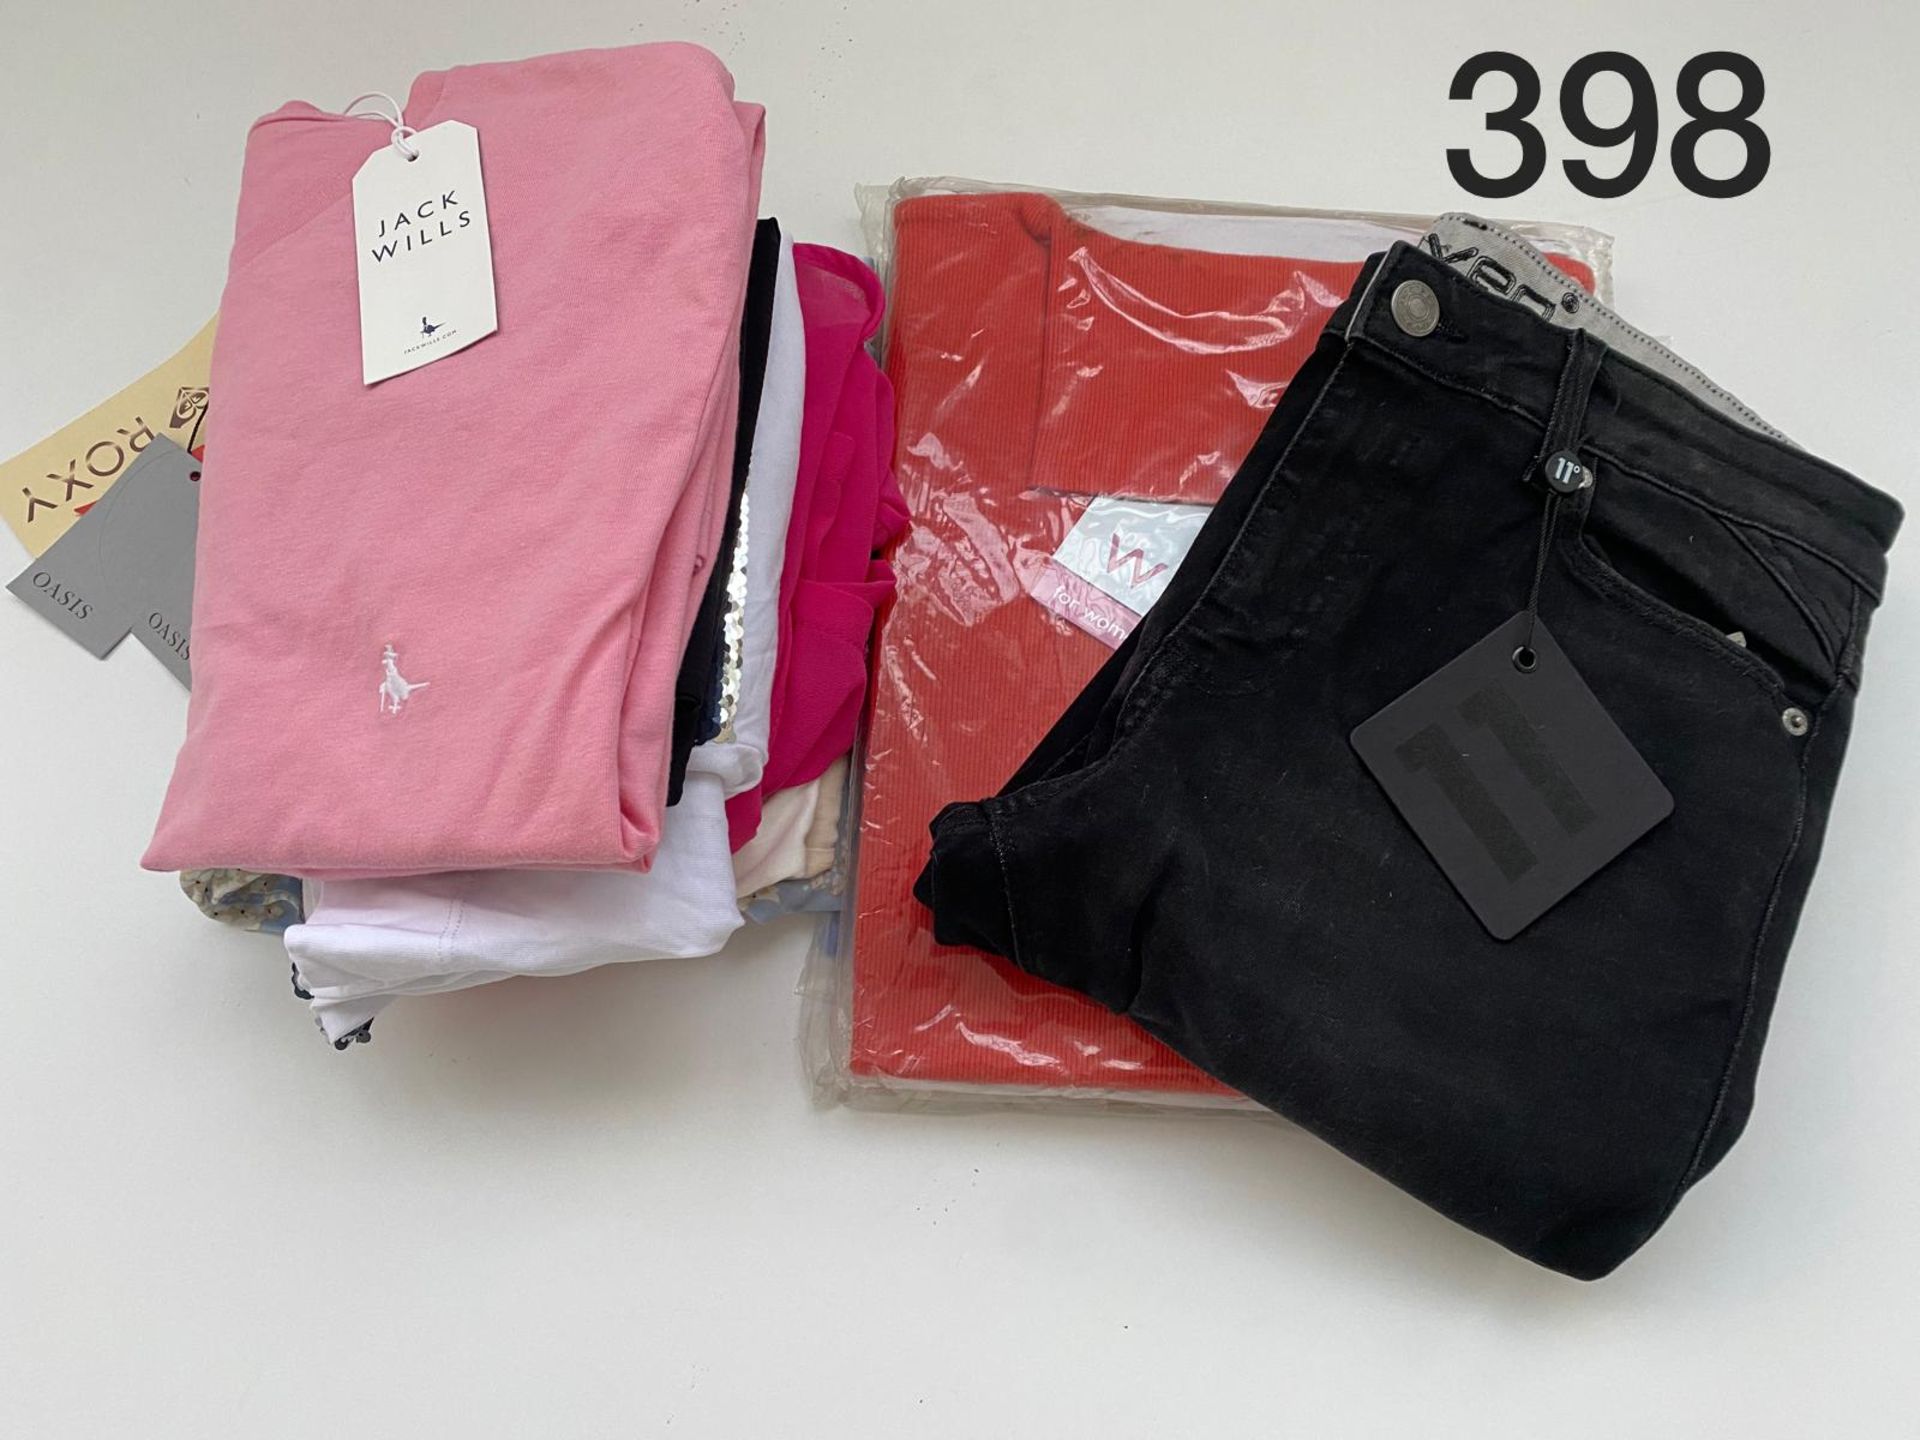 10 PIECE LADIES CLOTHING LOT IN VARIOUS SIZES INCLUDING JACK WILLS, 11 DEGREES, OASIS ETC RRP £220